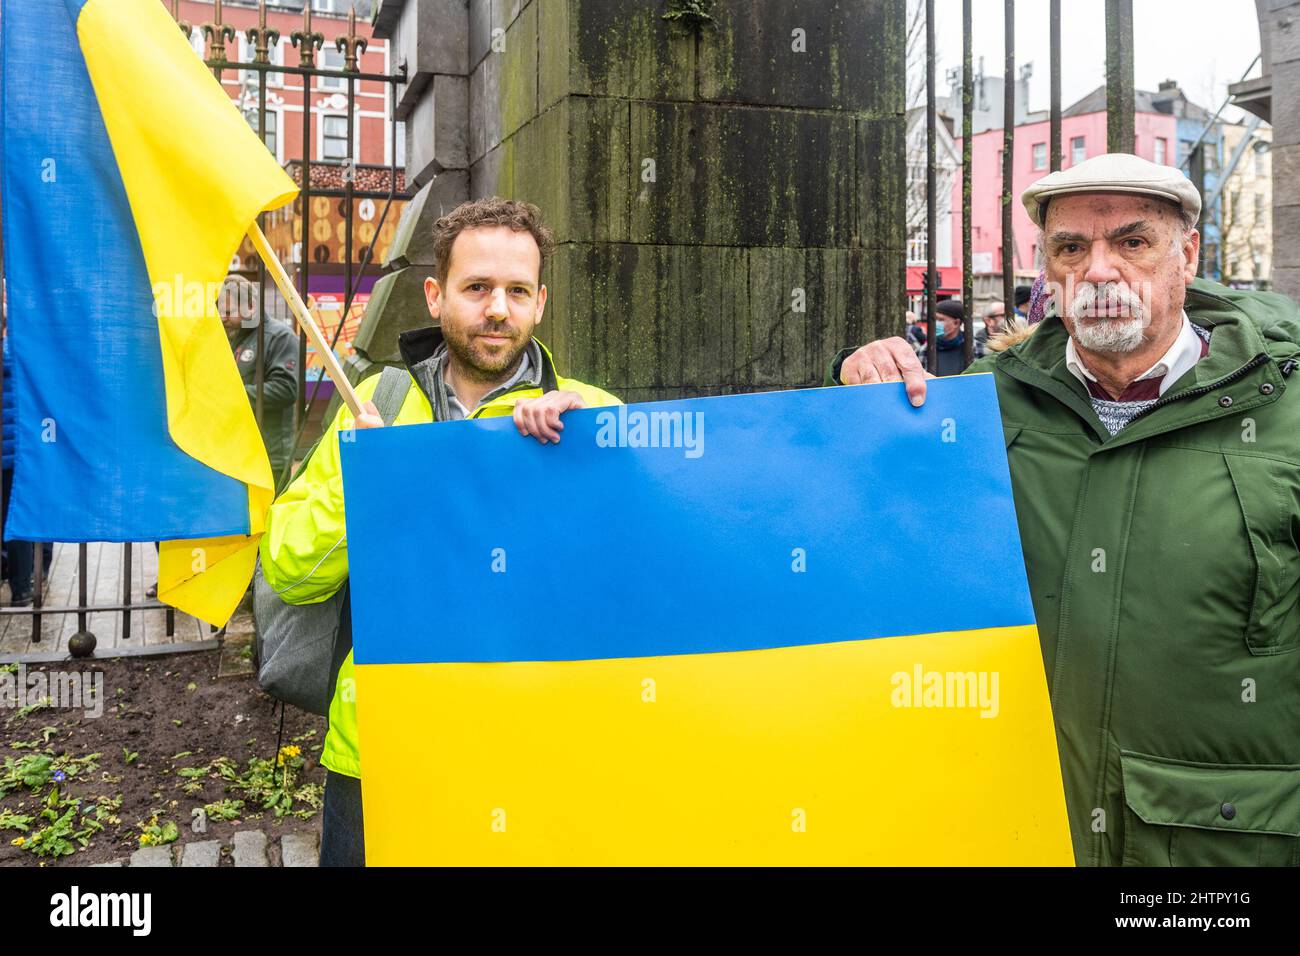 Cork, Ireland. 2nd Mar, 2022. Around 100 people gathered in Bishop Lucey Peace Park in Cork city today, in solidarity with the people of Ukraine. The Cork Lore Mayor, Cllr. Colm Kelleher, laid a wreath and tied a ribbon to the gates of the park. Credit: AG News/Alamy Live News Stock Photo